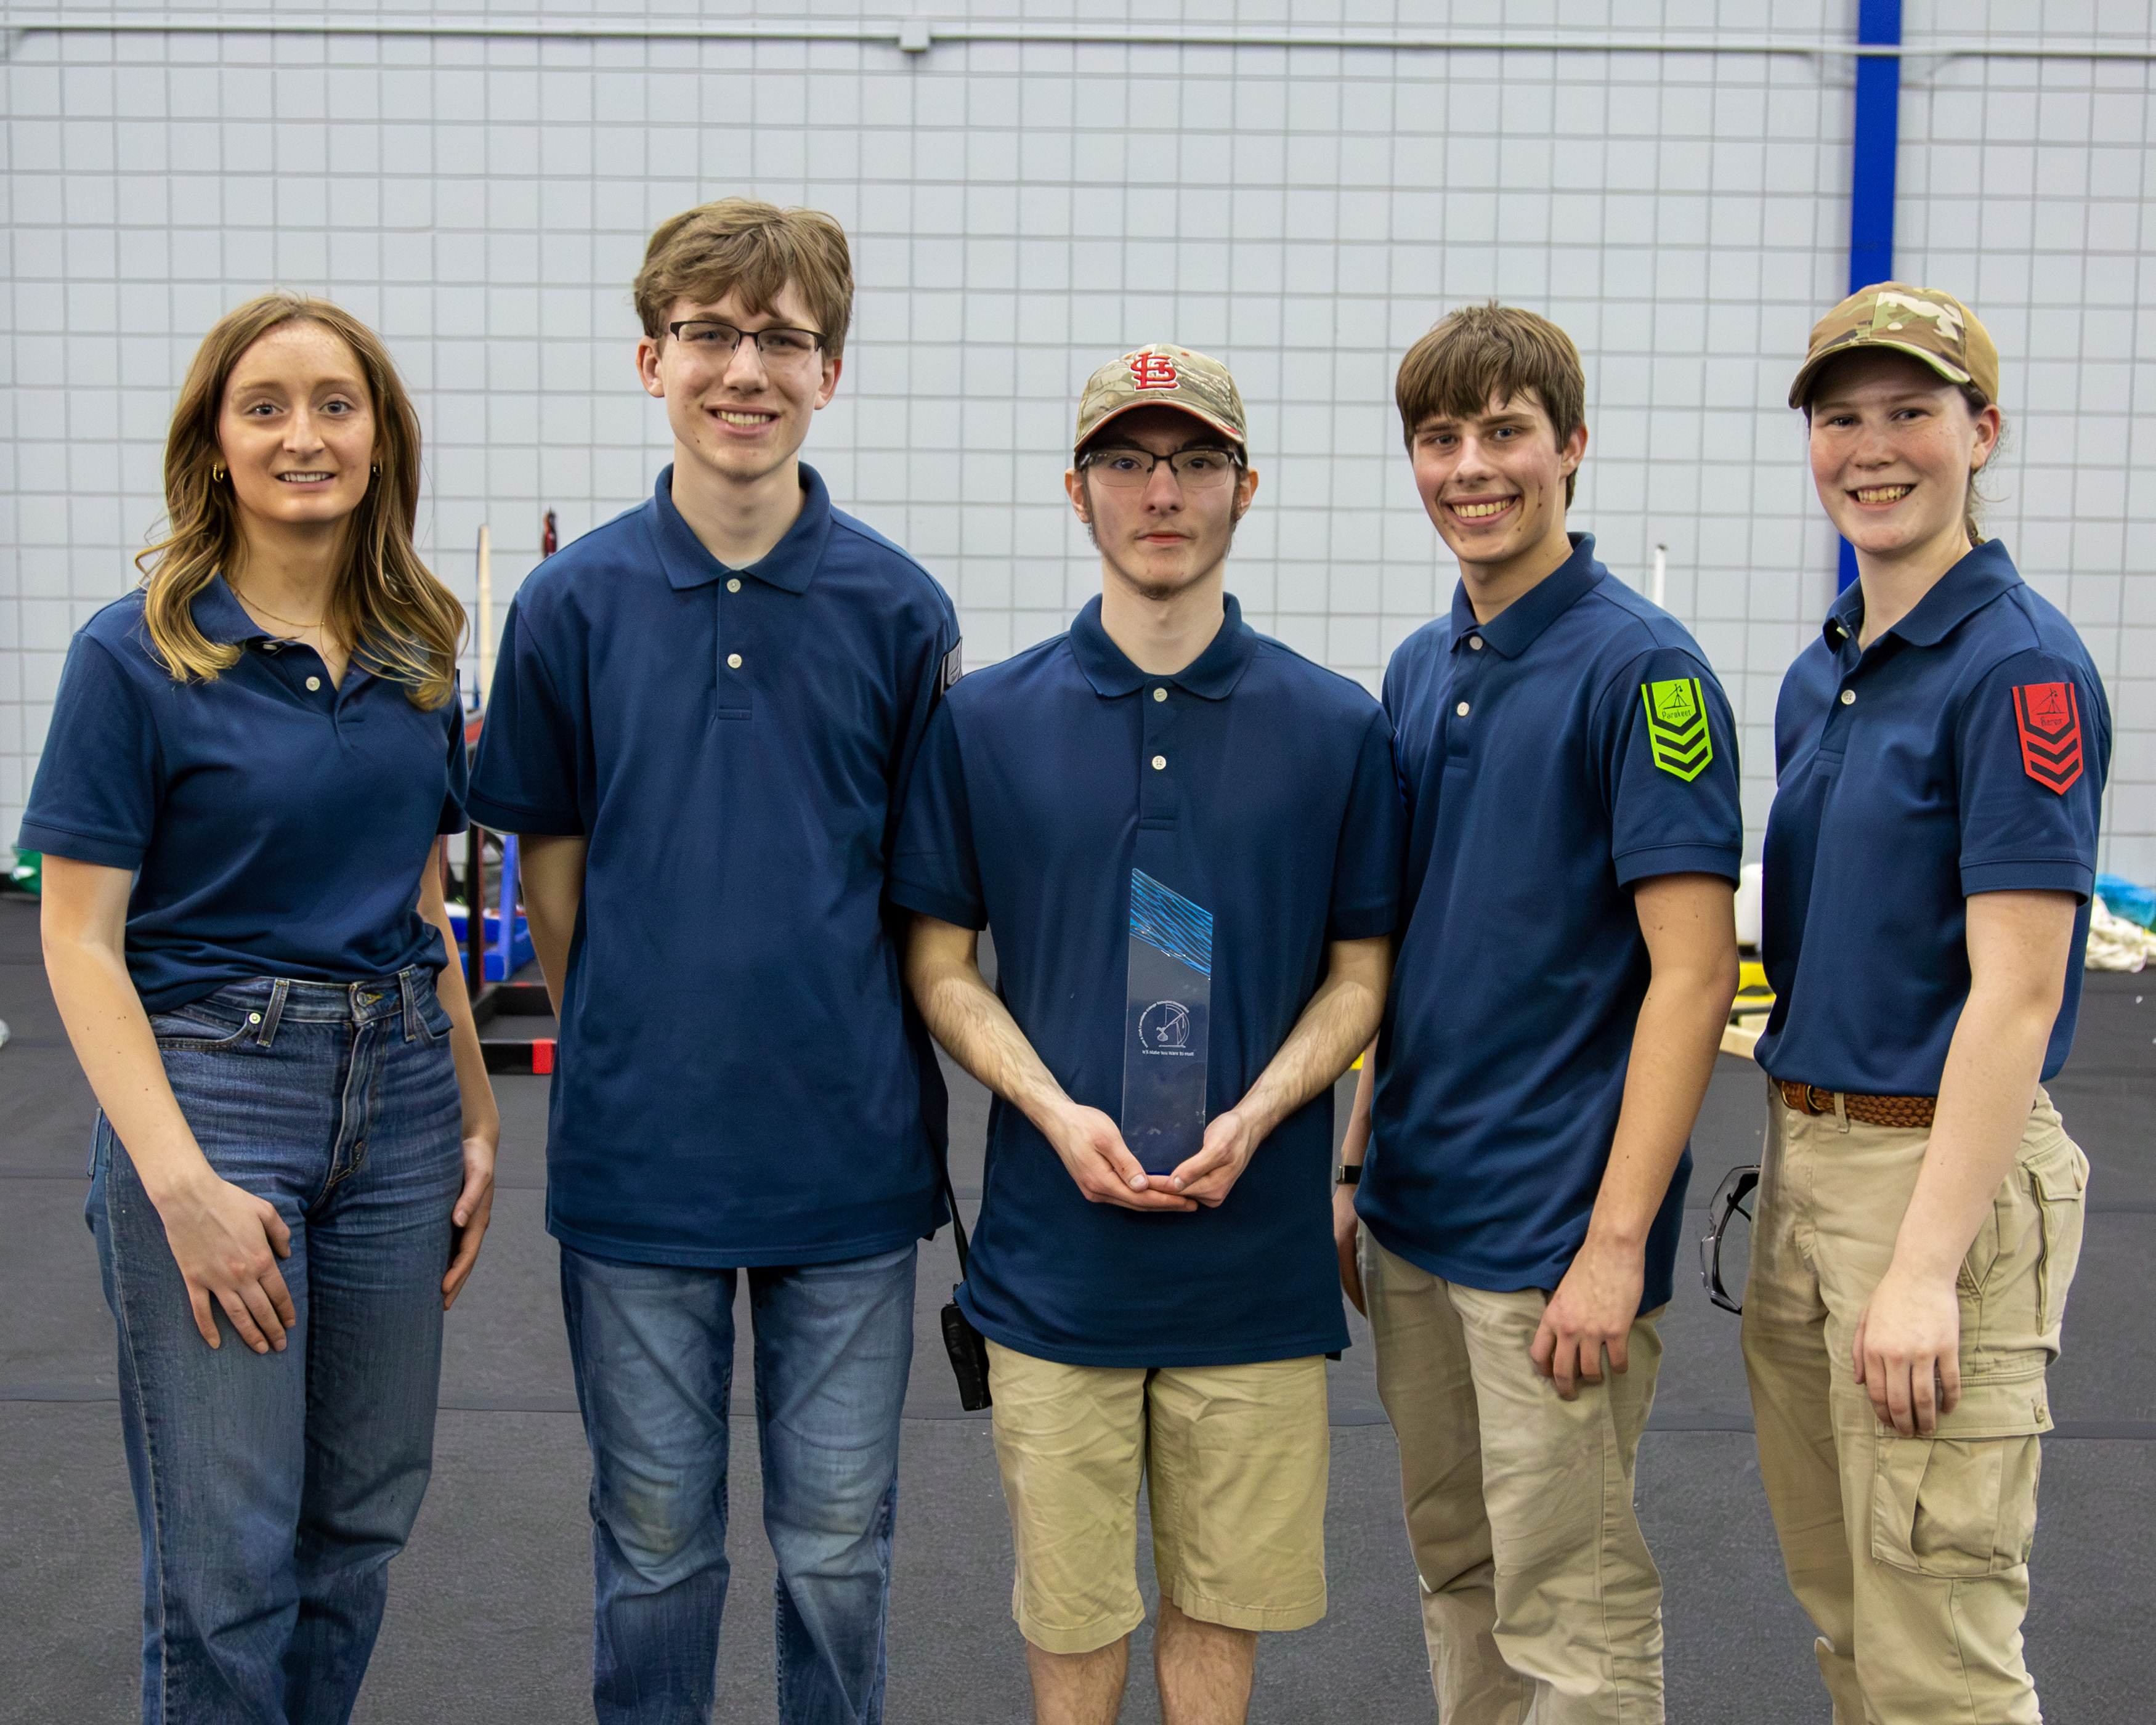 Team M3, a group of area homeschool students, finished first in this year’s reporting competition. From left to right are Caroline Blaymaier, Blake Schaper, Eli Hawk, Jacob Schaper and Abi Zimmerman.